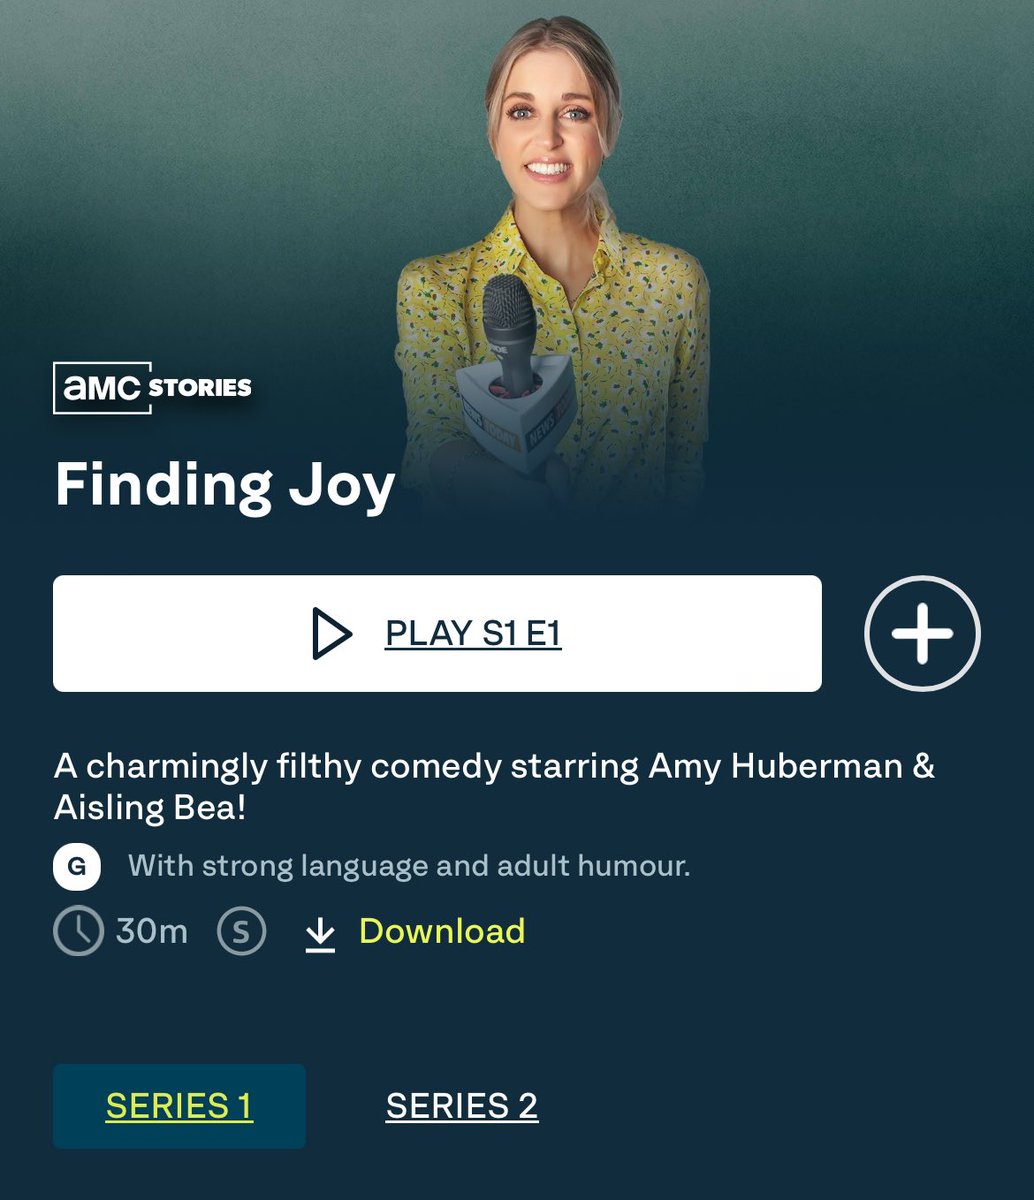 I’ve never seen Season 2 of @amyhuberman #FindingJoy so pleased to see it’s been added to @ITVX as season 1 was great 😃